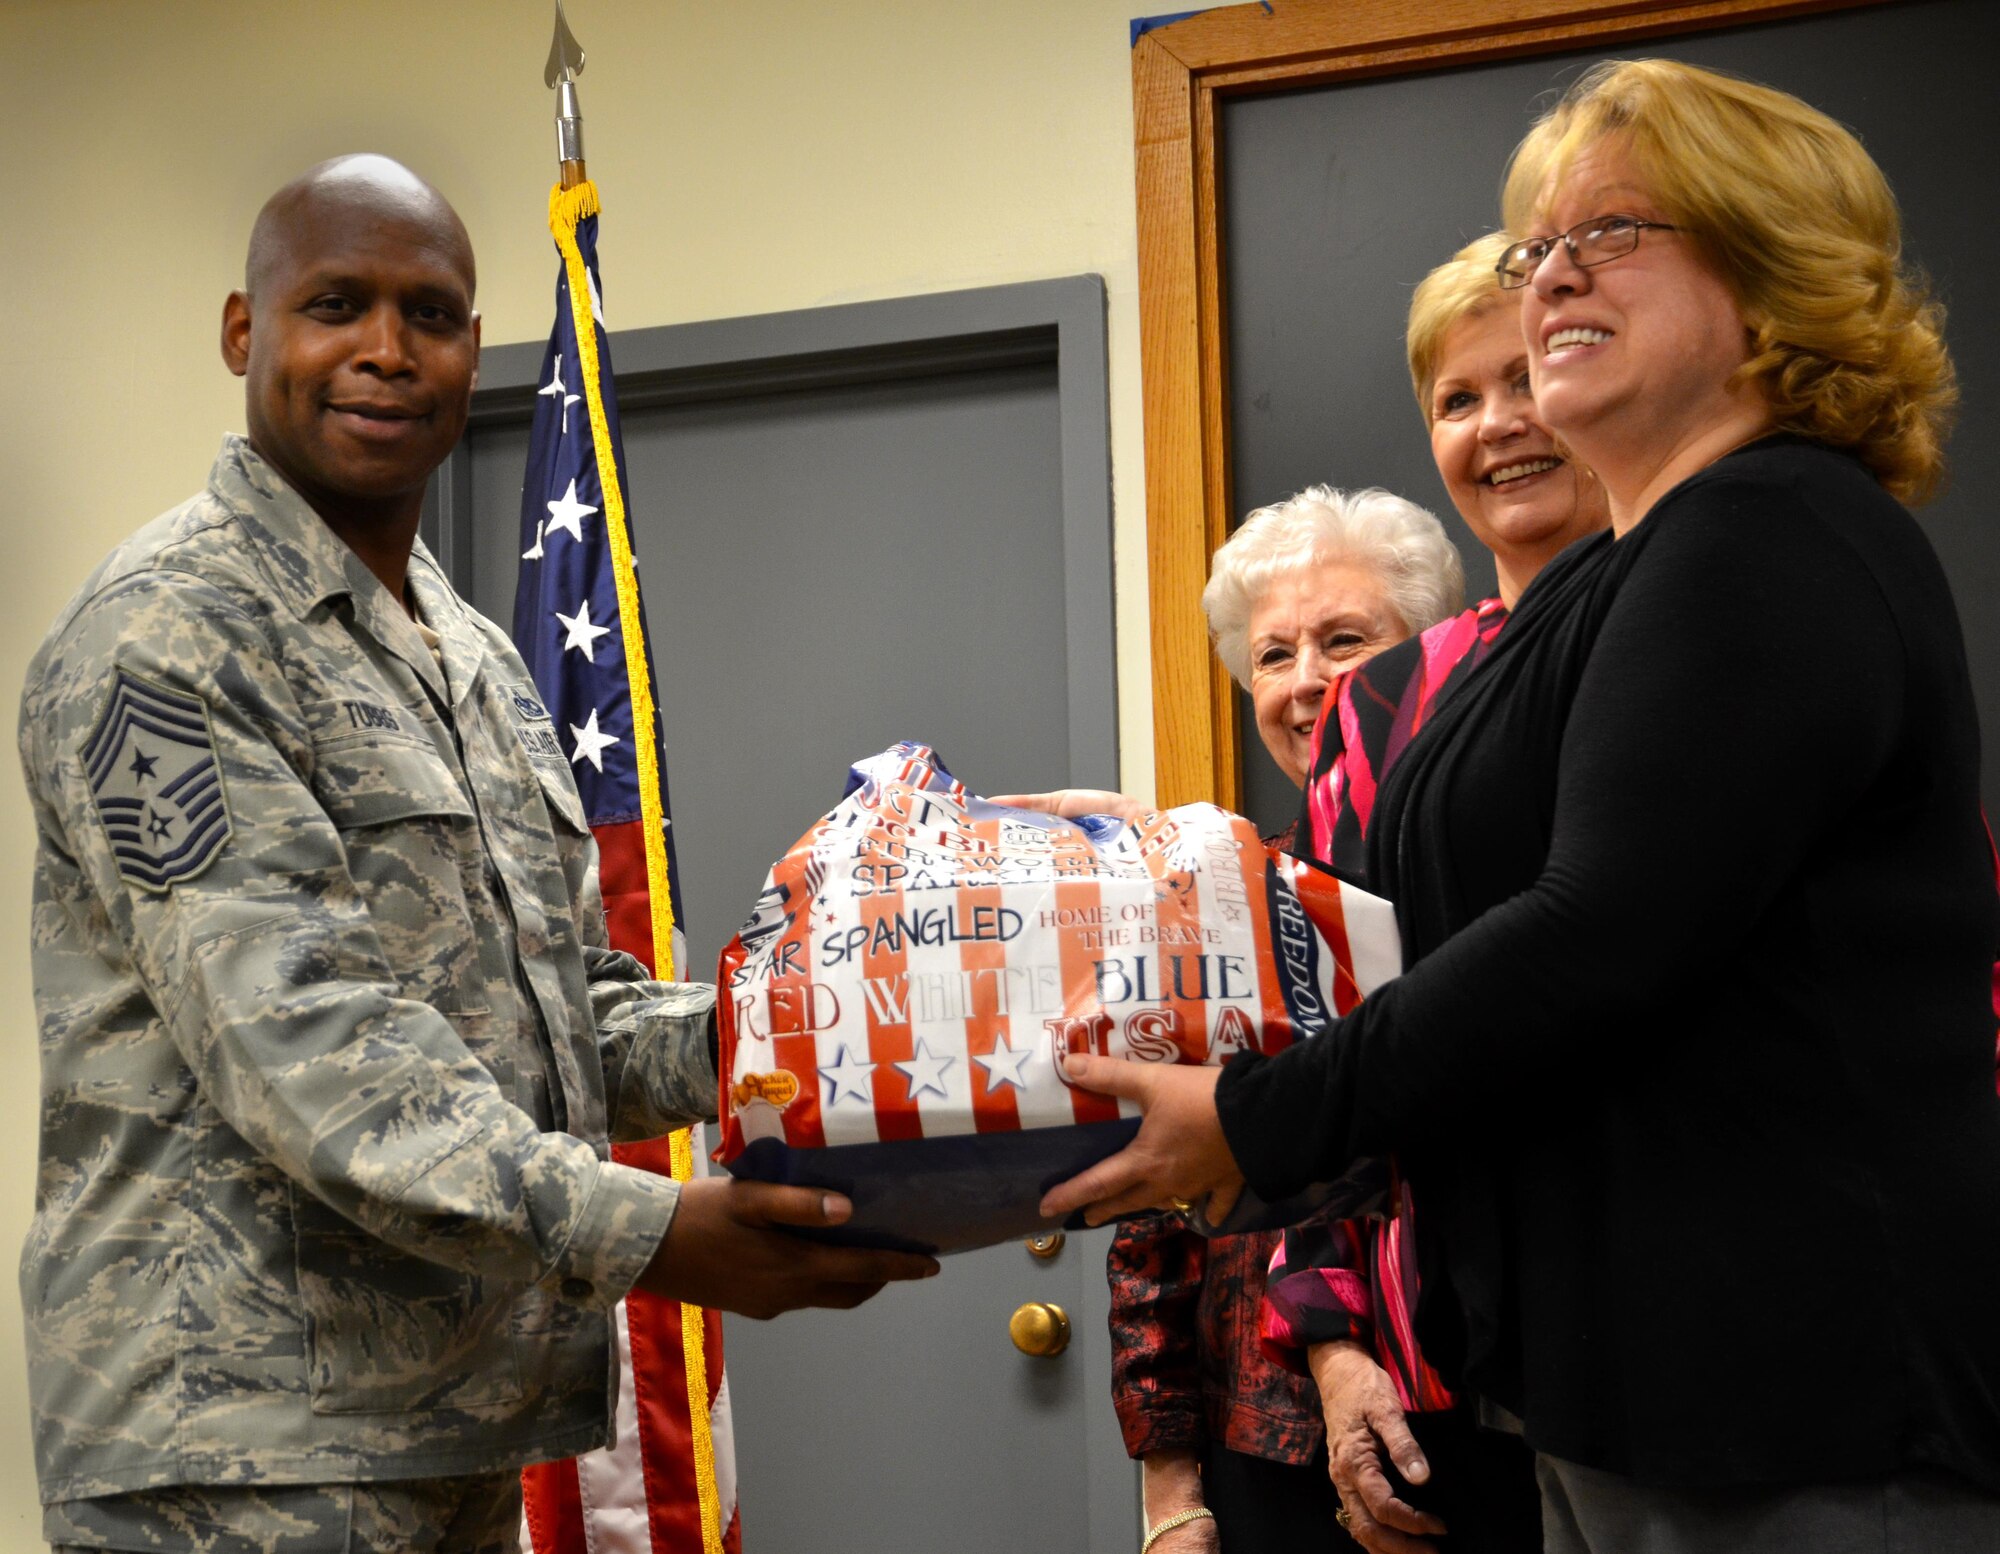 Chief Lyndon Tubbs, 94th Airlift Wing command chief, receives a donation of cards from Helen Skelton, Order of Eastern Star Grand Chapter of Georgia chairperson of operation at Dobbins Air Reserve Base, Georgia on October 25, 2016. The Eastern Stars gave over 10,000 cards to be sent to troops that may not be in the company of family this holiday. (U.S. Air Force photo by Senior Airman Lauren Douglas)